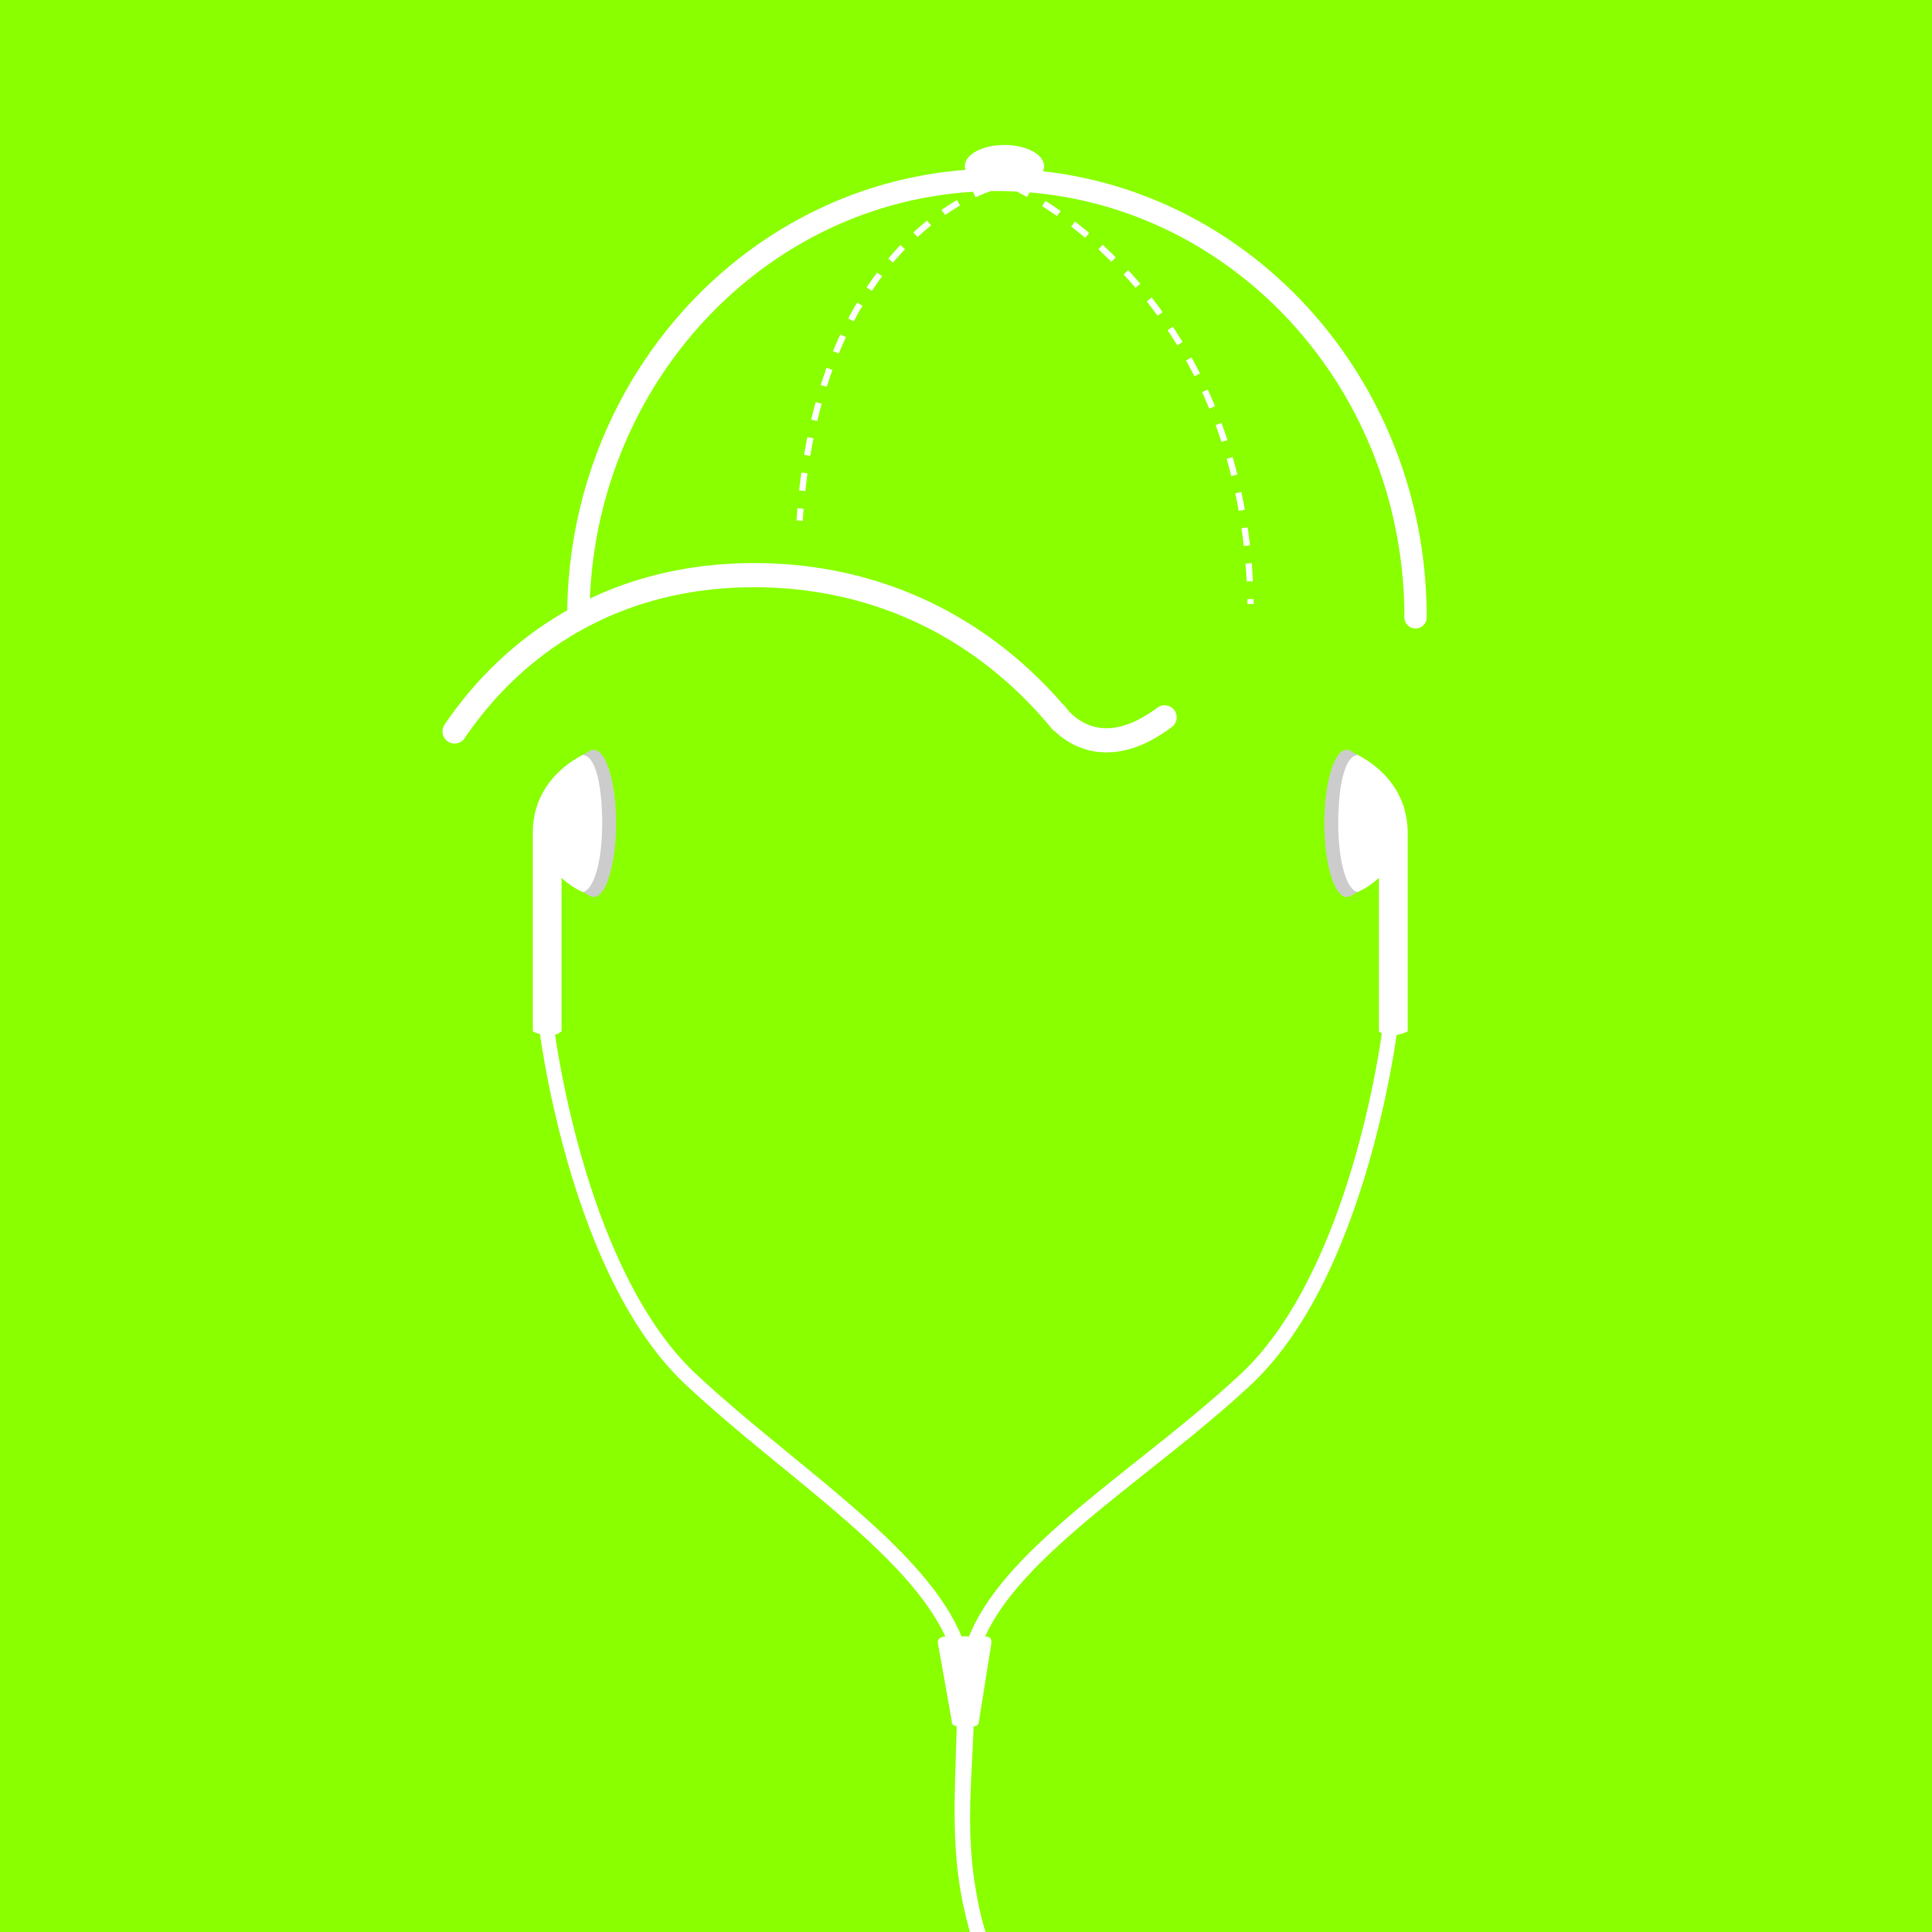 boy or girl wearing earbuds with baseball cap - music illustration on green background